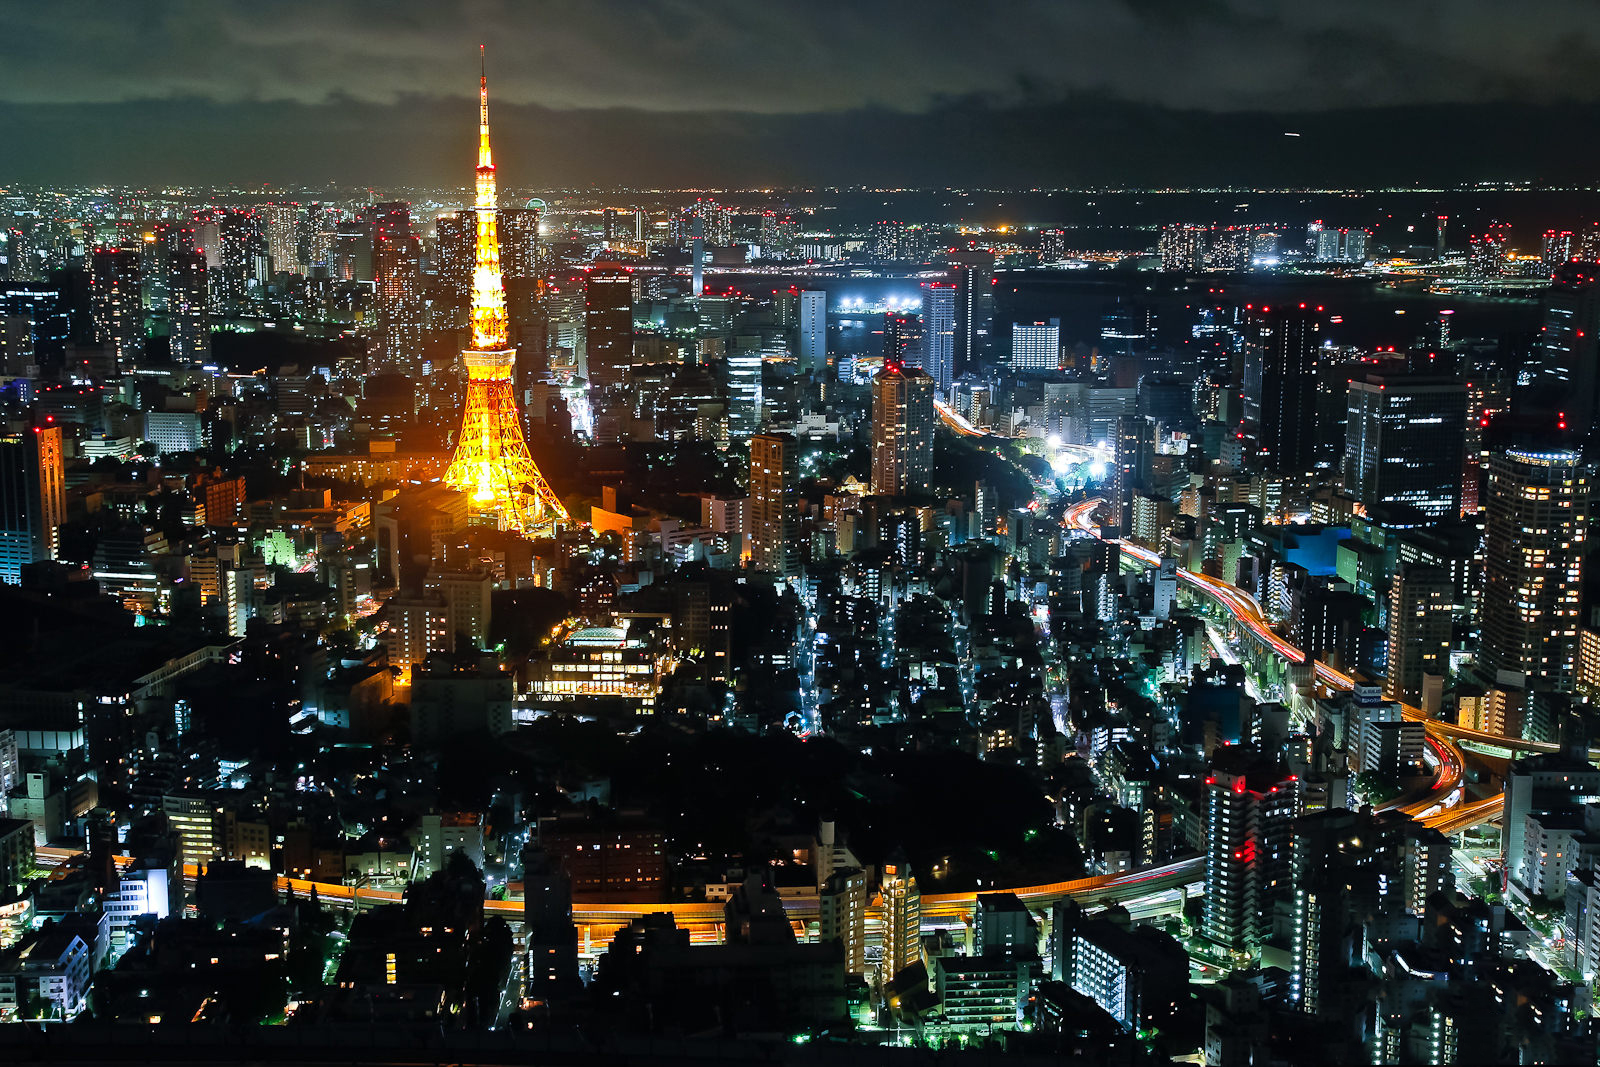 WORLD'S WEALTHIEST CITY- That tower might as well be made of gold, since Tokyo tops the charts with a GDP of 1,520 billion dollars, only beating New York by a mere 310 billion dollars.